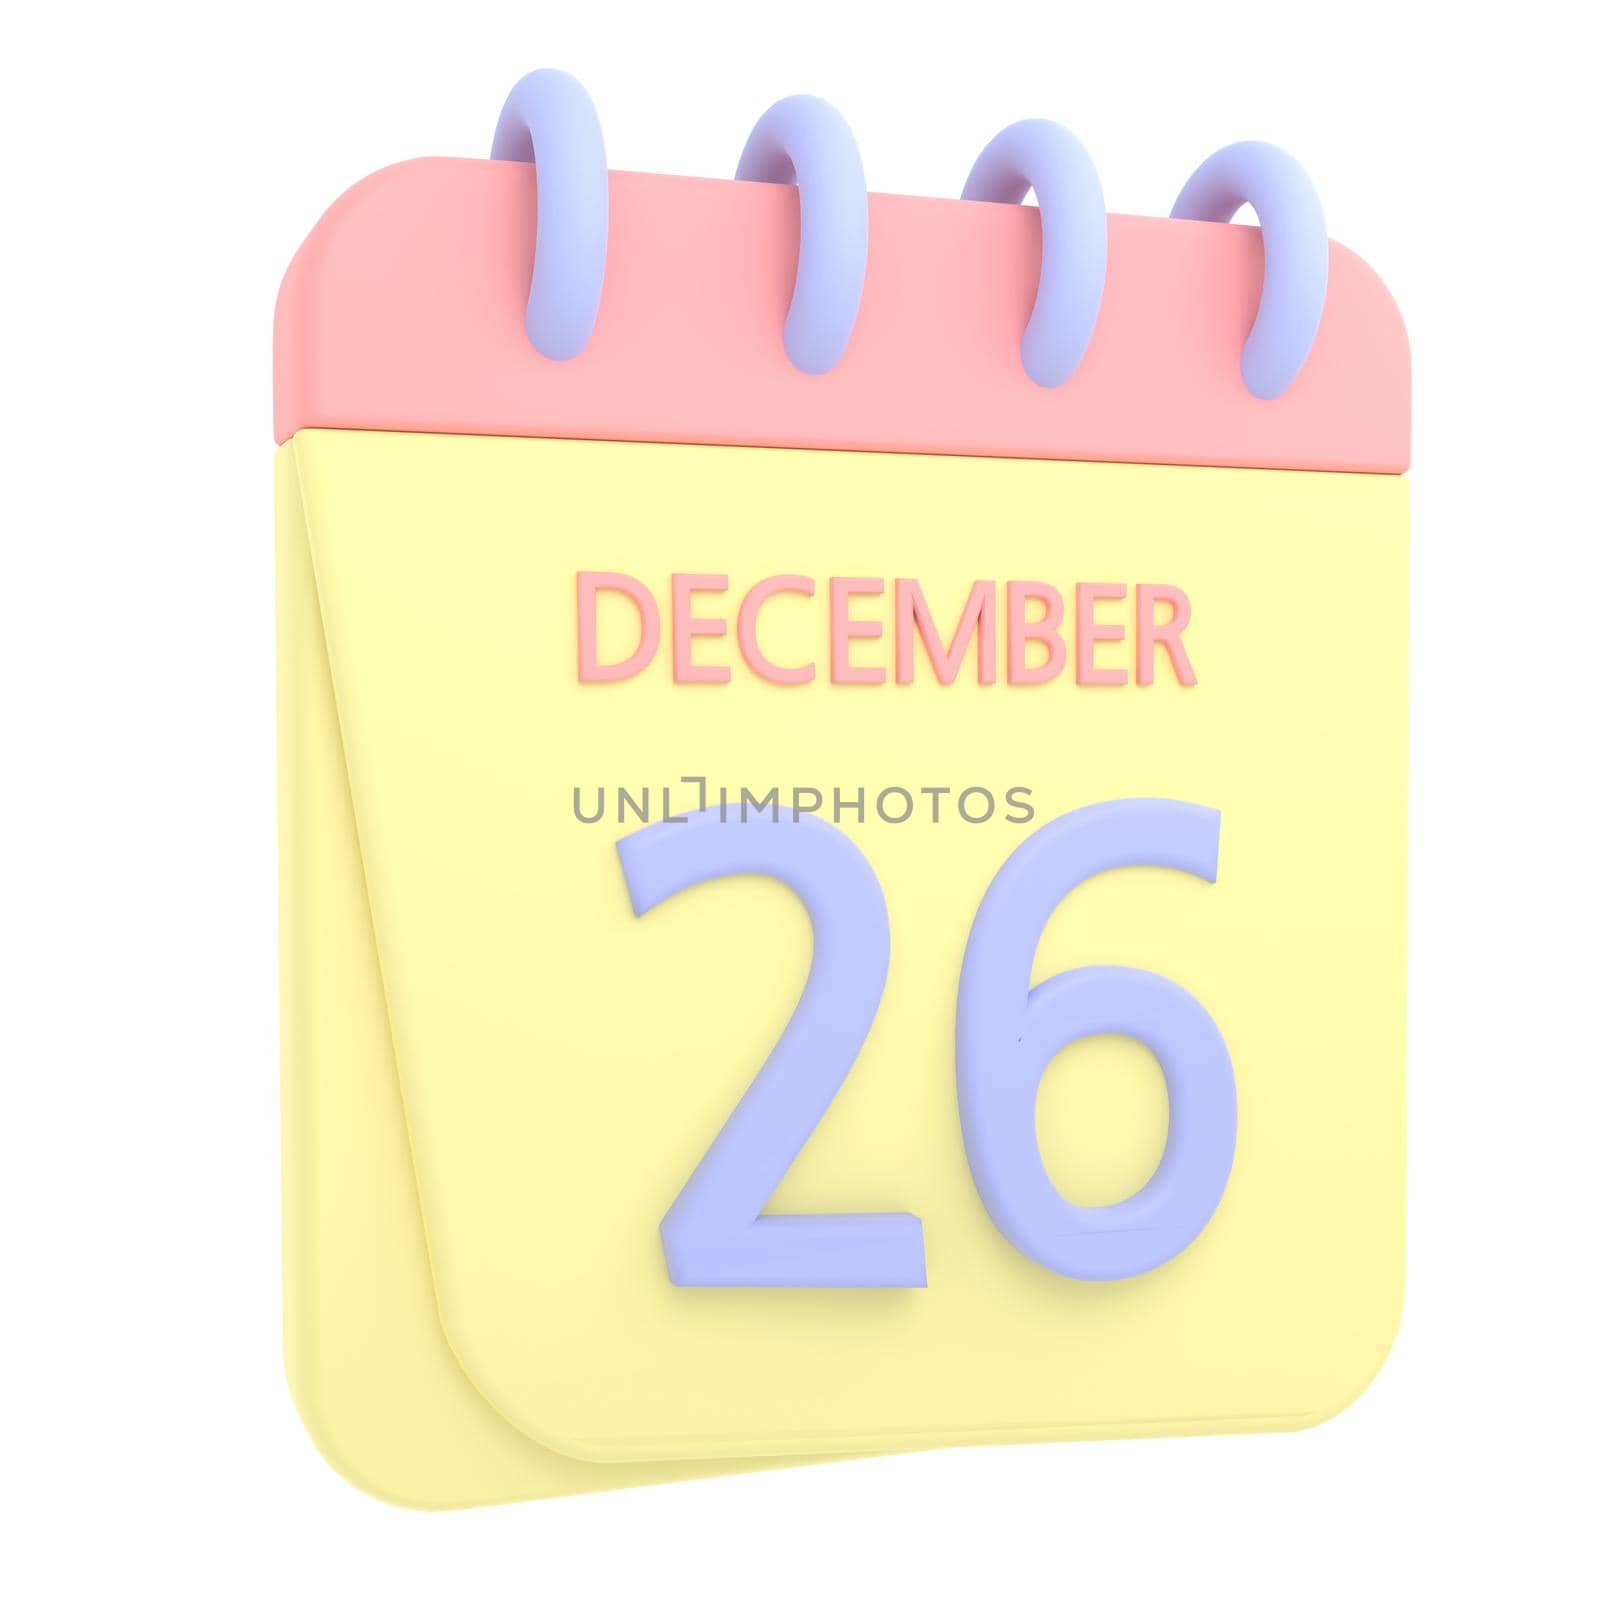 26th December 3D calendar icon. Web style. High resolution image. White background